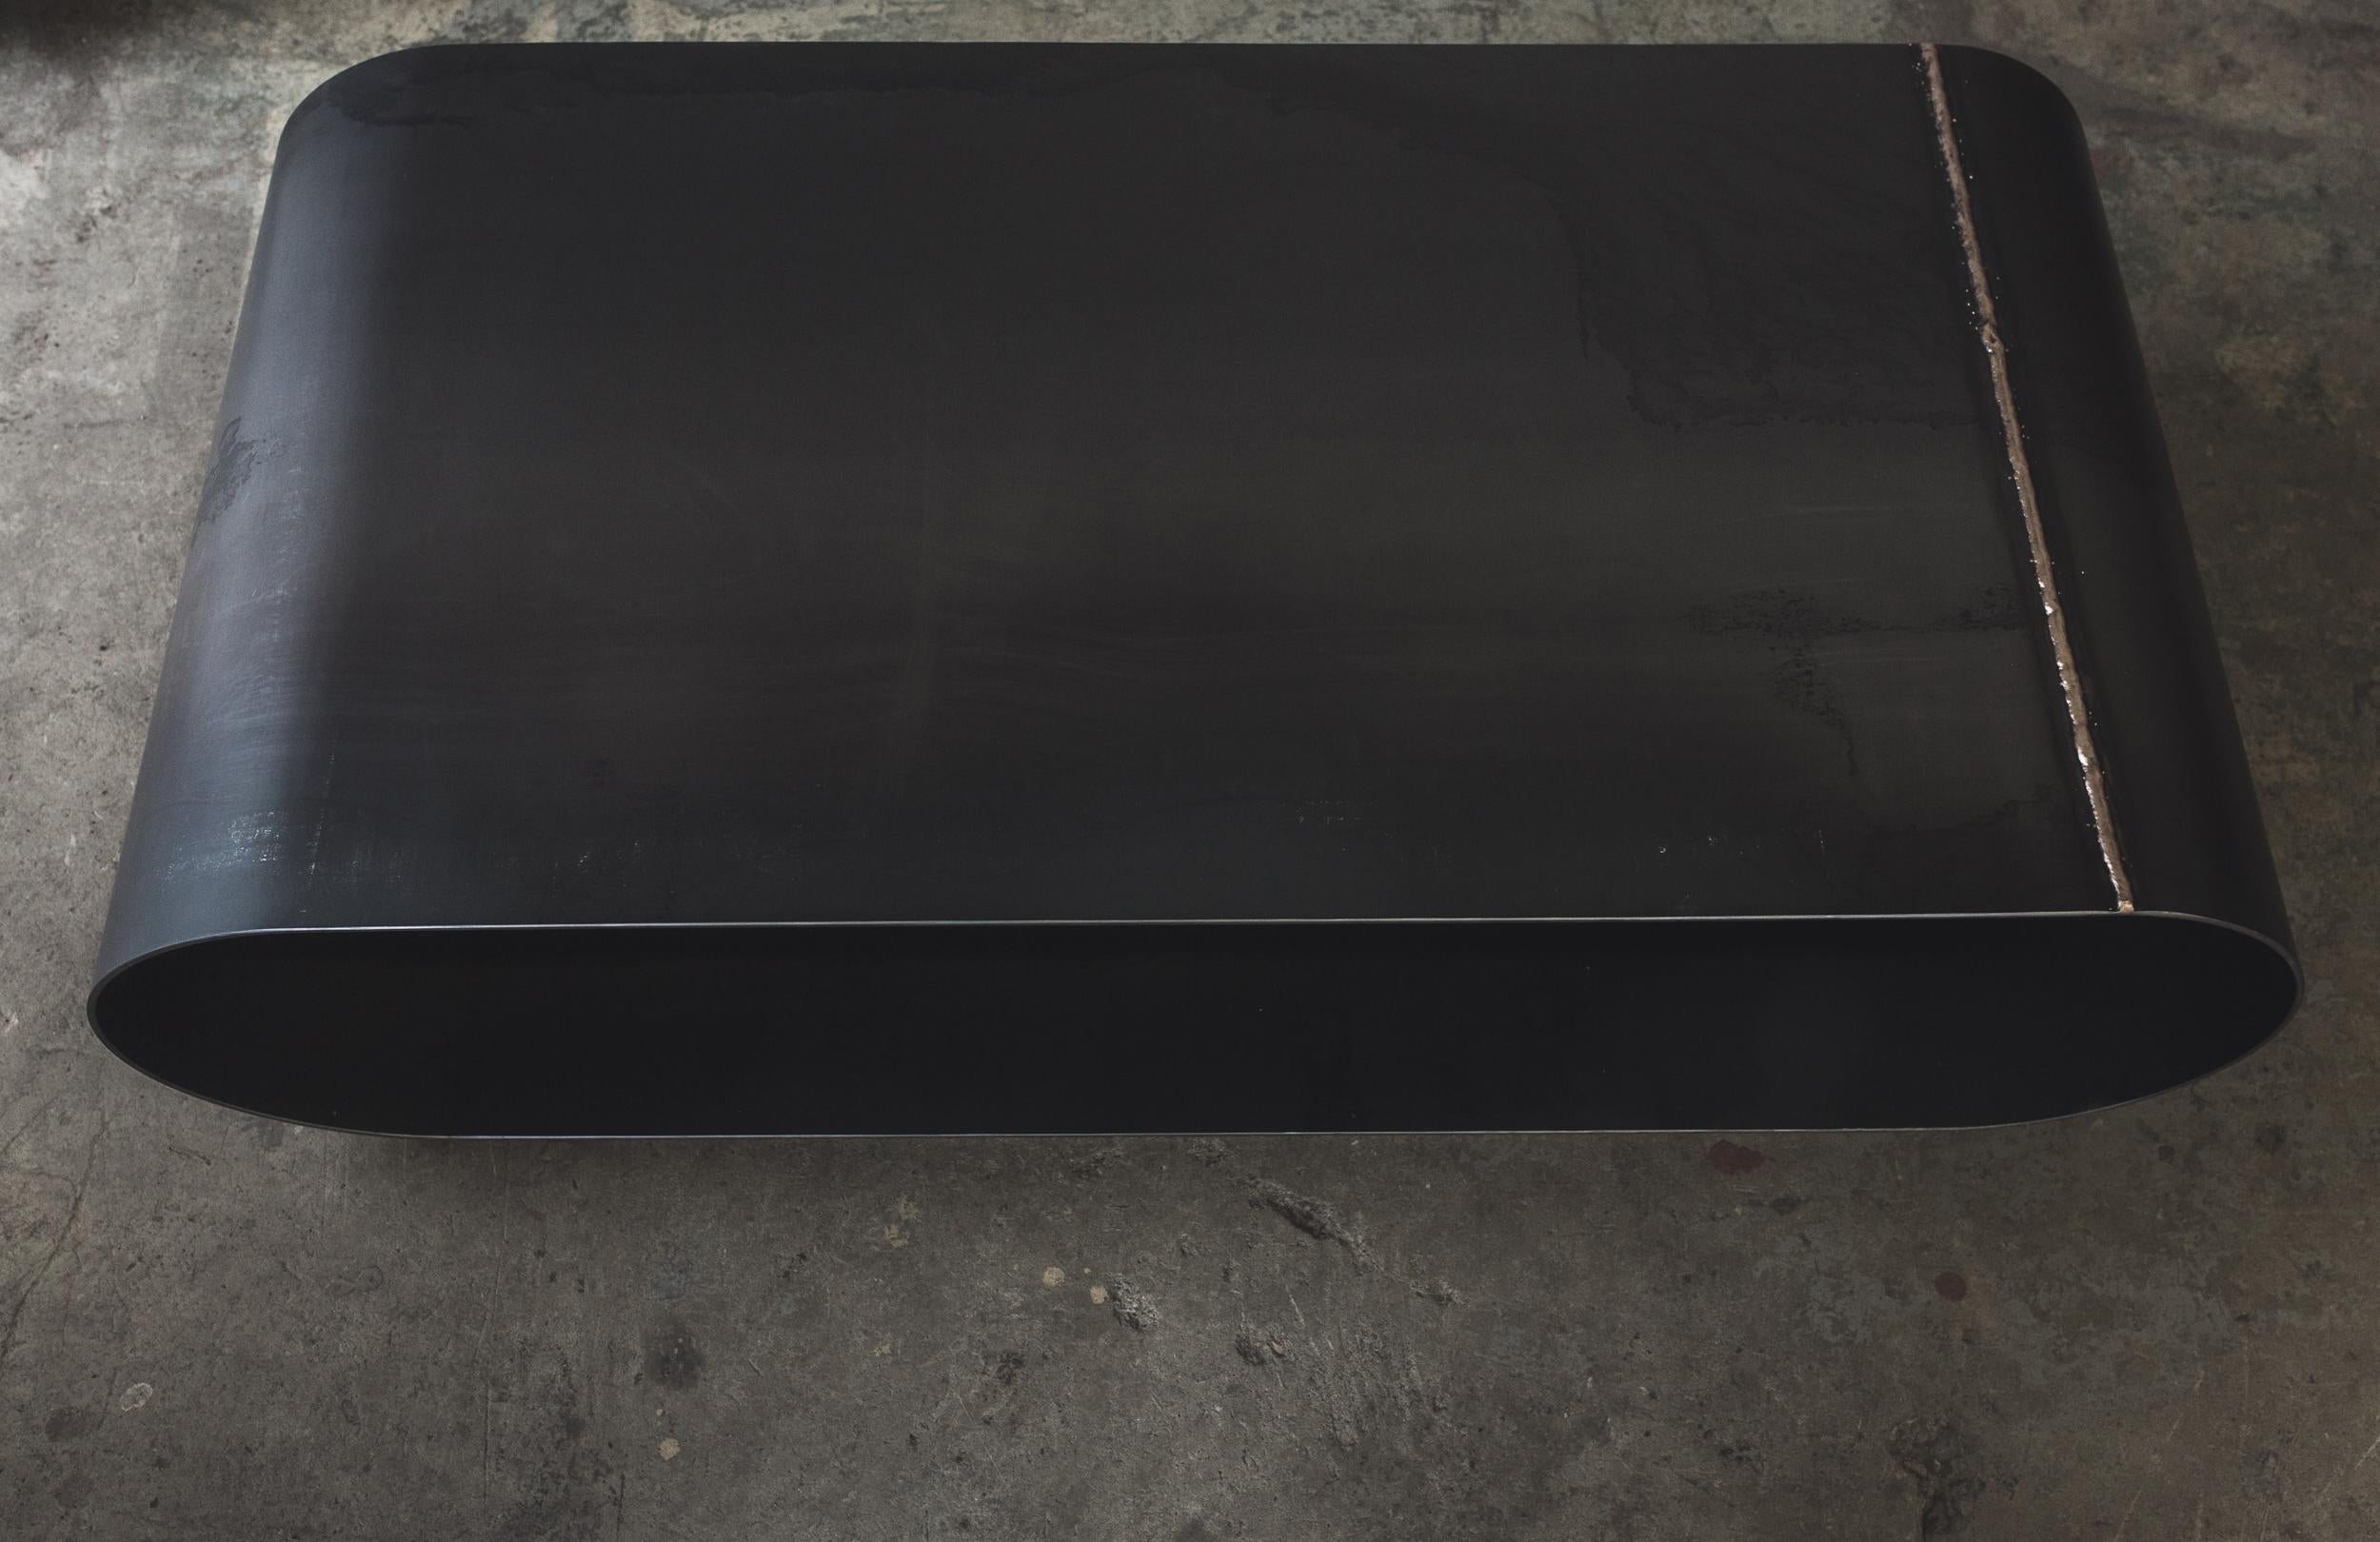 In stock. A Jouir coffee table in Blackened steel, and clear coated with a durable finish. This listing is for size 48